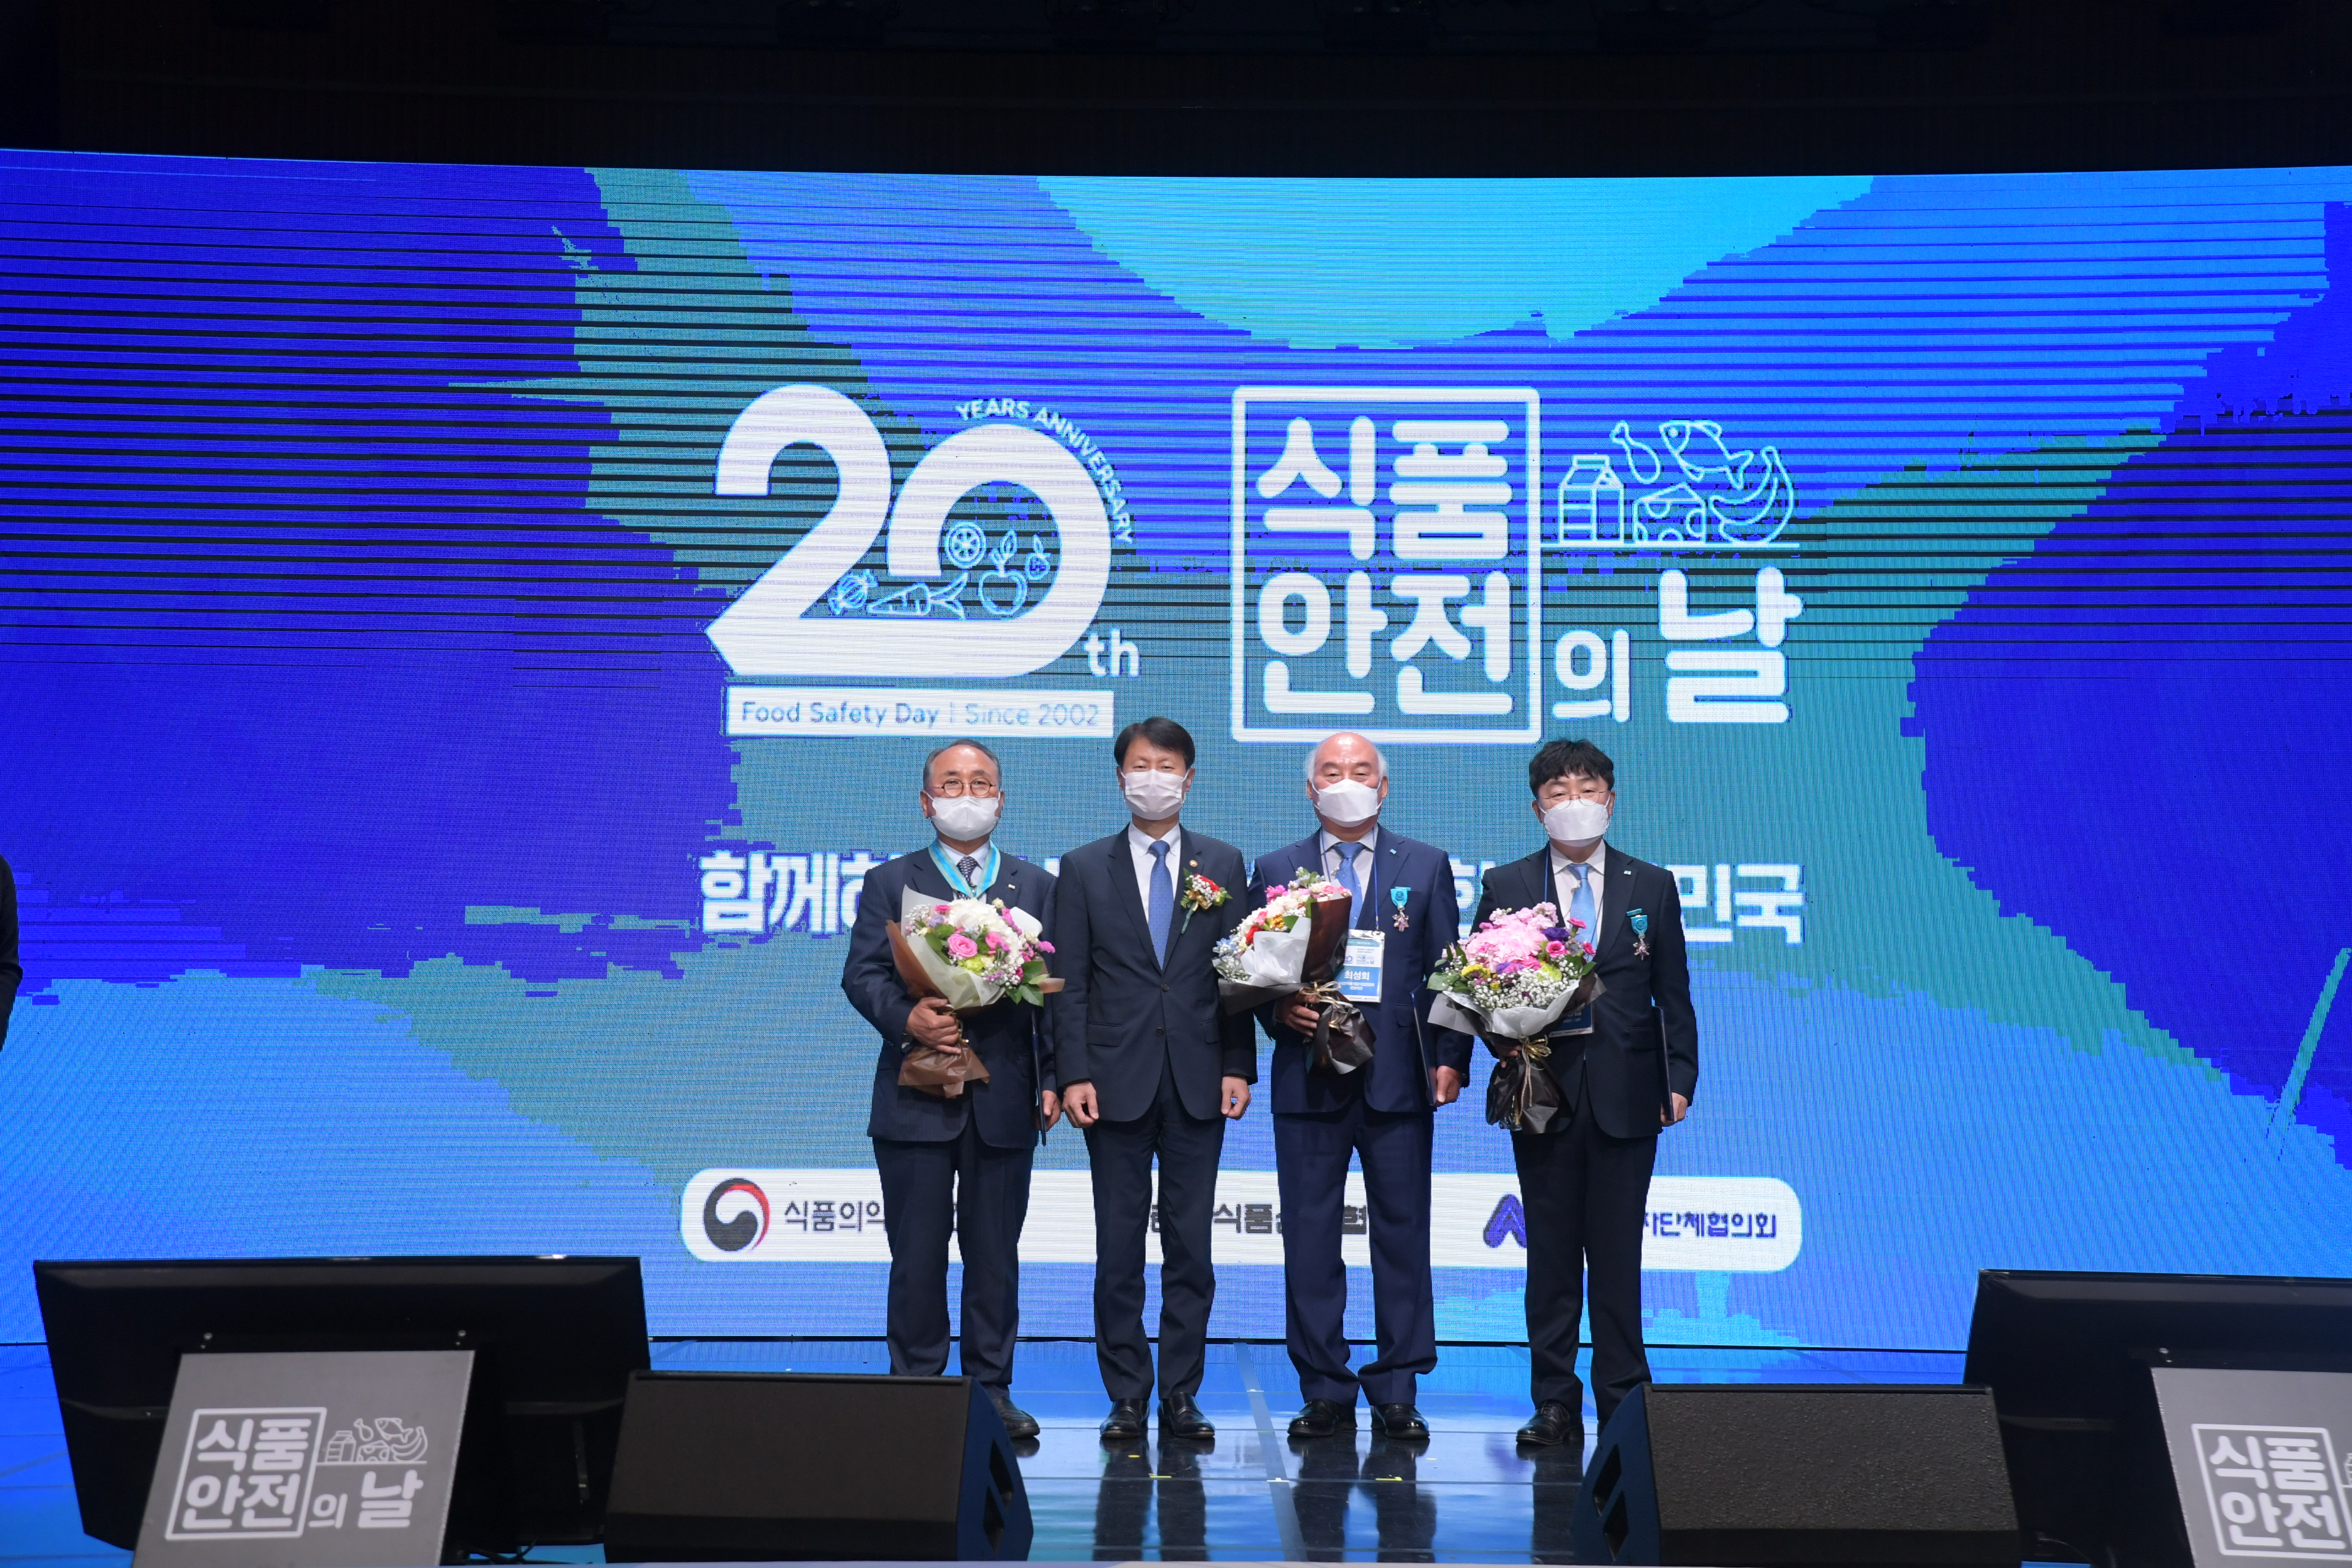 Photo News2 - [May 14, 2021] Minister attends the 20th Food Safety Day Ceremony